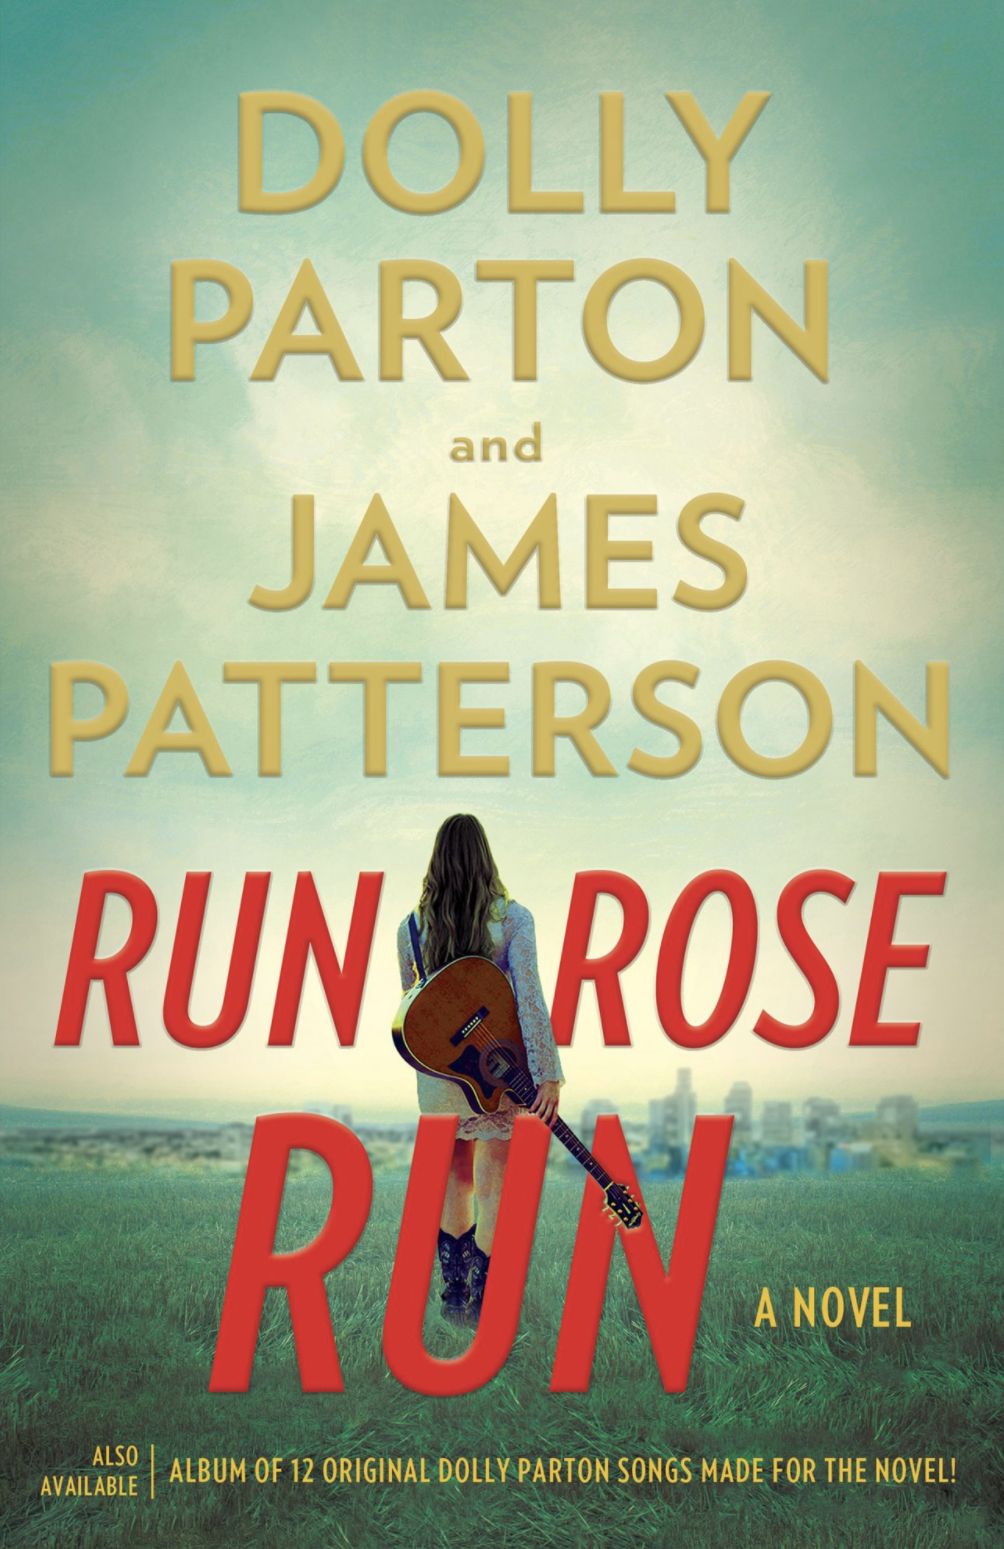 Image of the book cover for Run Rose Run